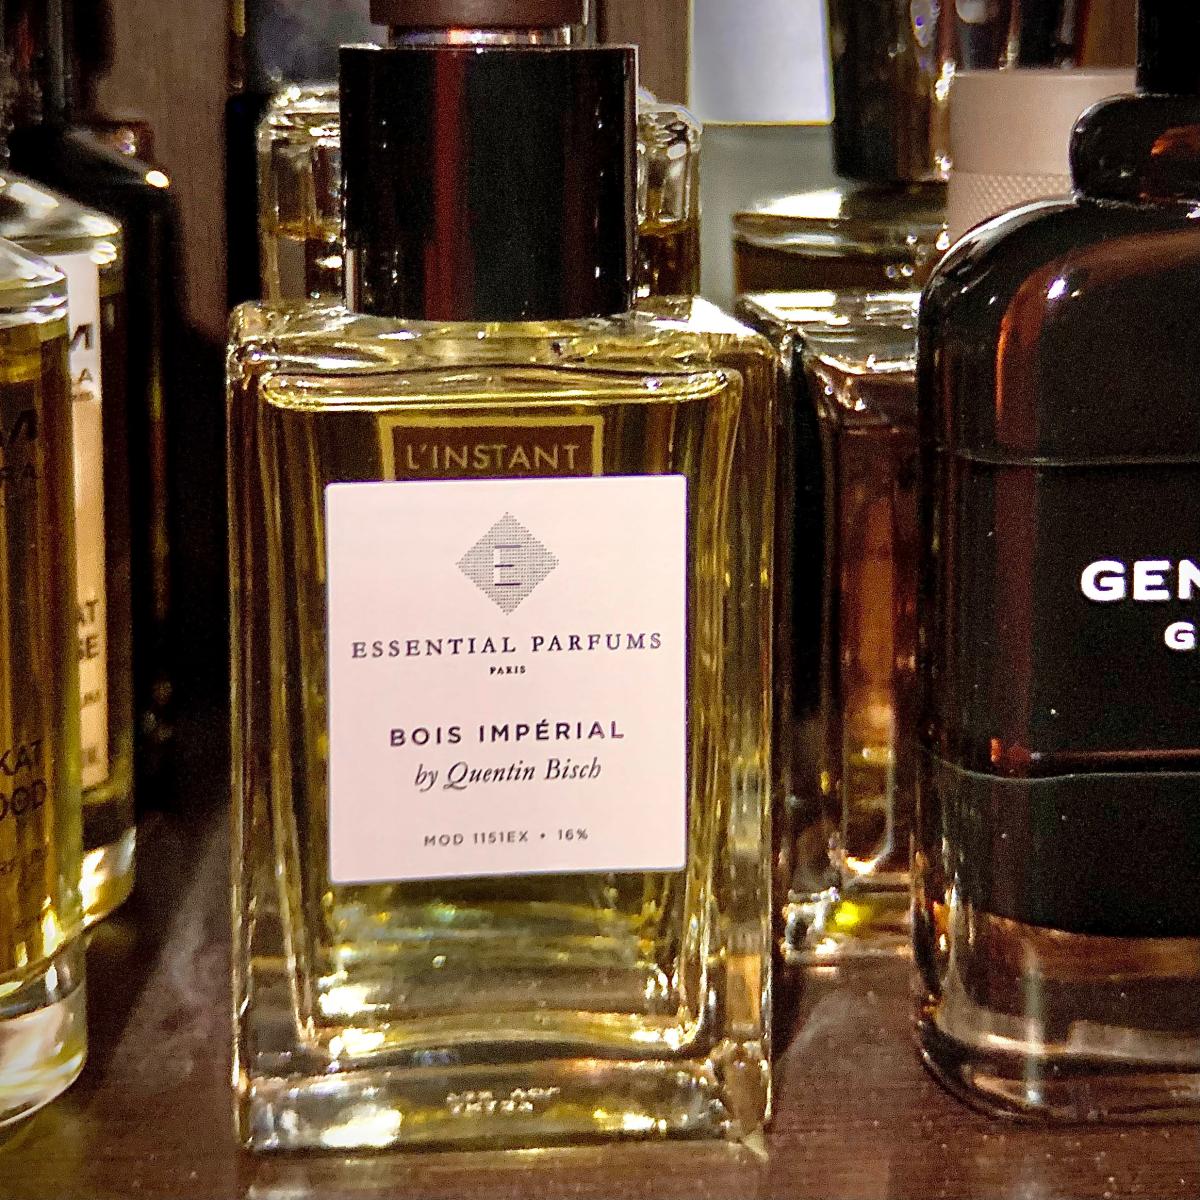 Bois imperial limited. Парфюм bois Imperial. Essential Parfums bois Imperial. Аромат bois Imperial Essential Parfums. Духи Essential Parfums bois Imperial by Quentin bisch.